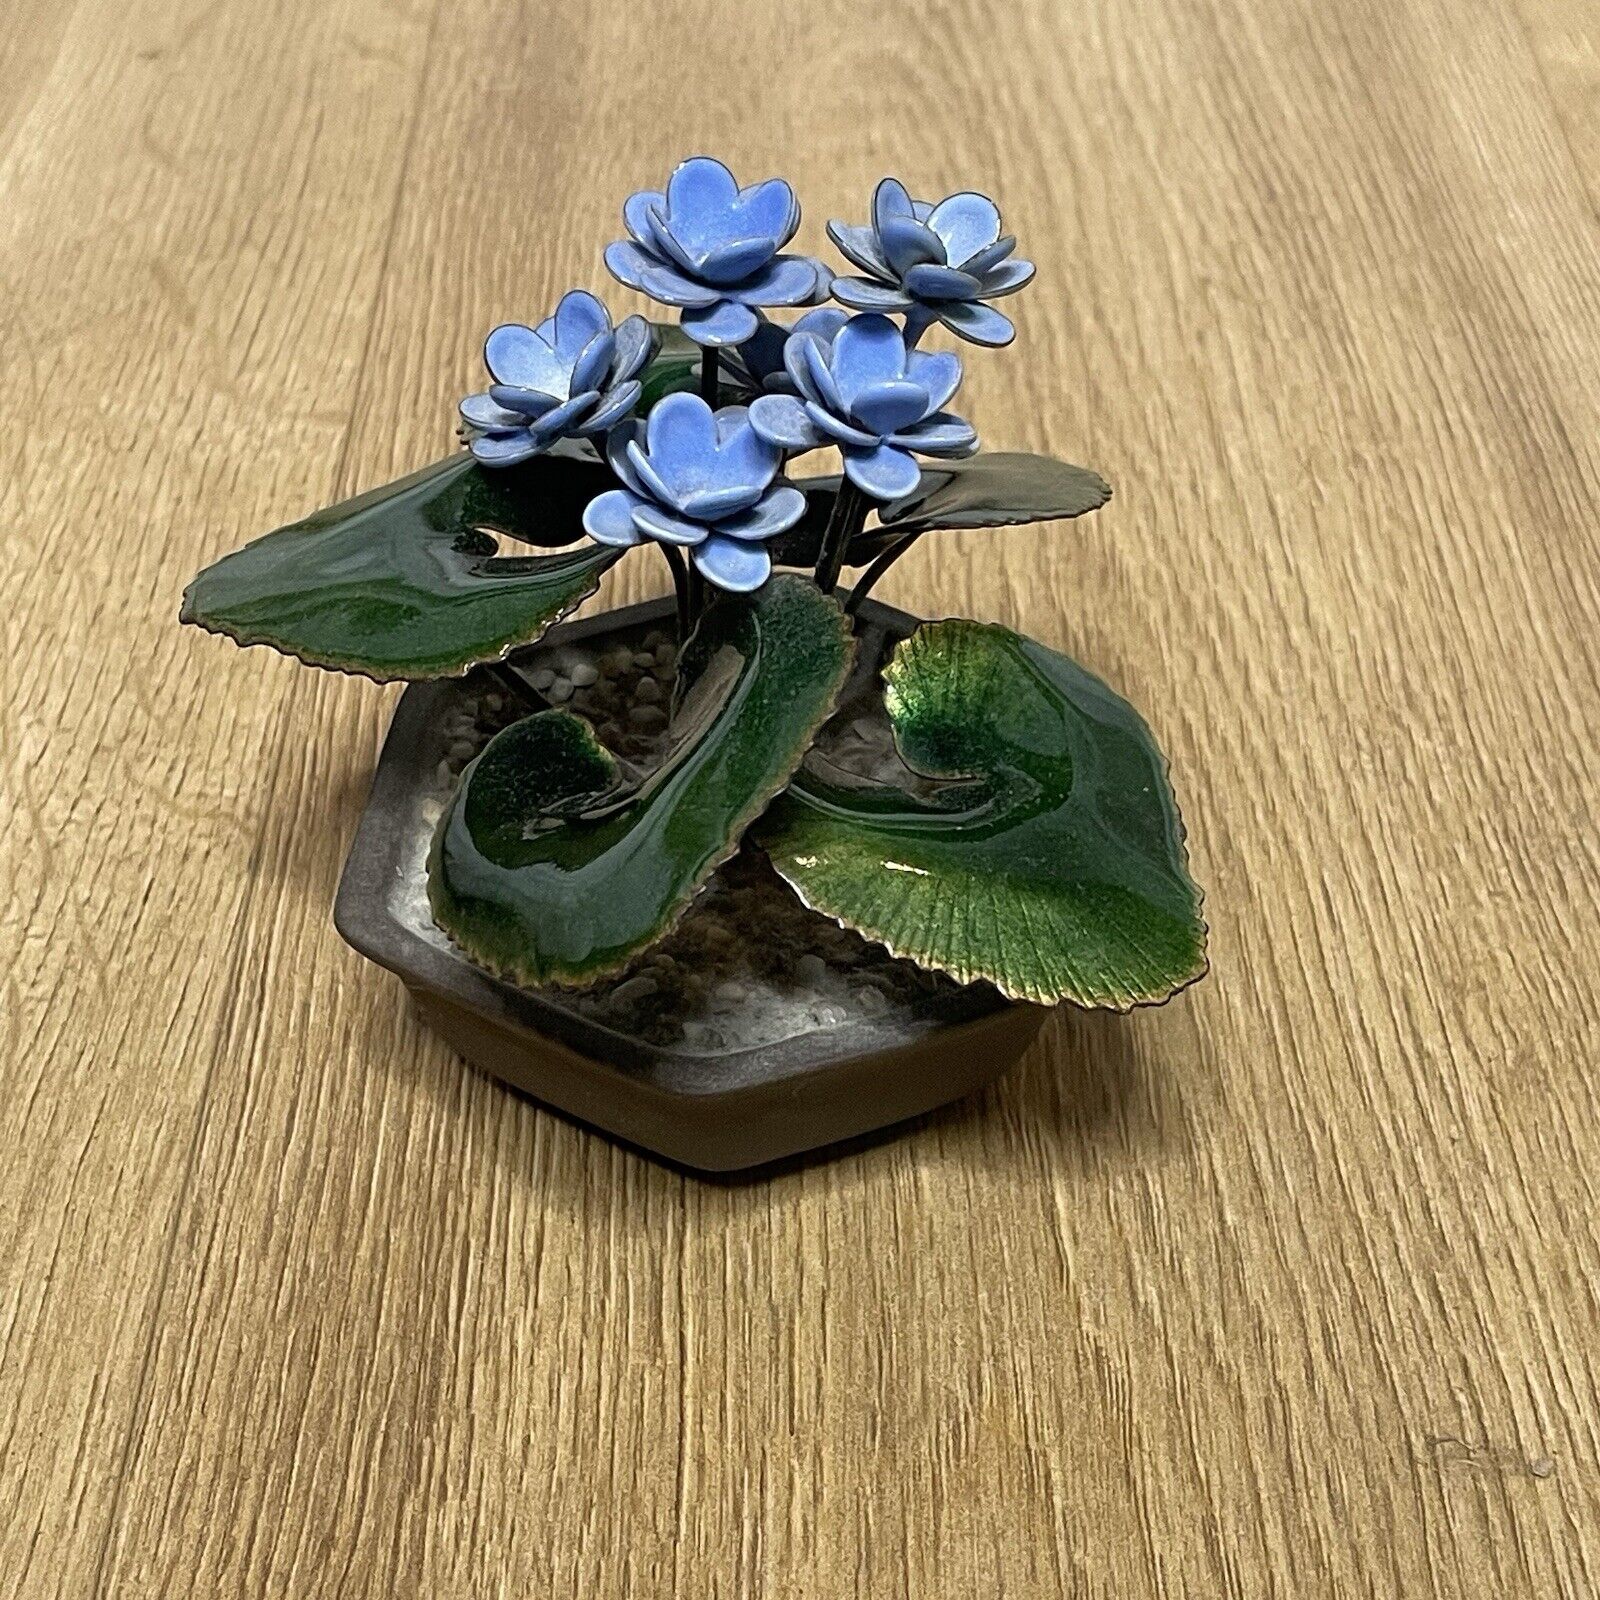 BOVANO Cheshire Enamel On Copper Potted African Violet Plant Sculpture Vintage